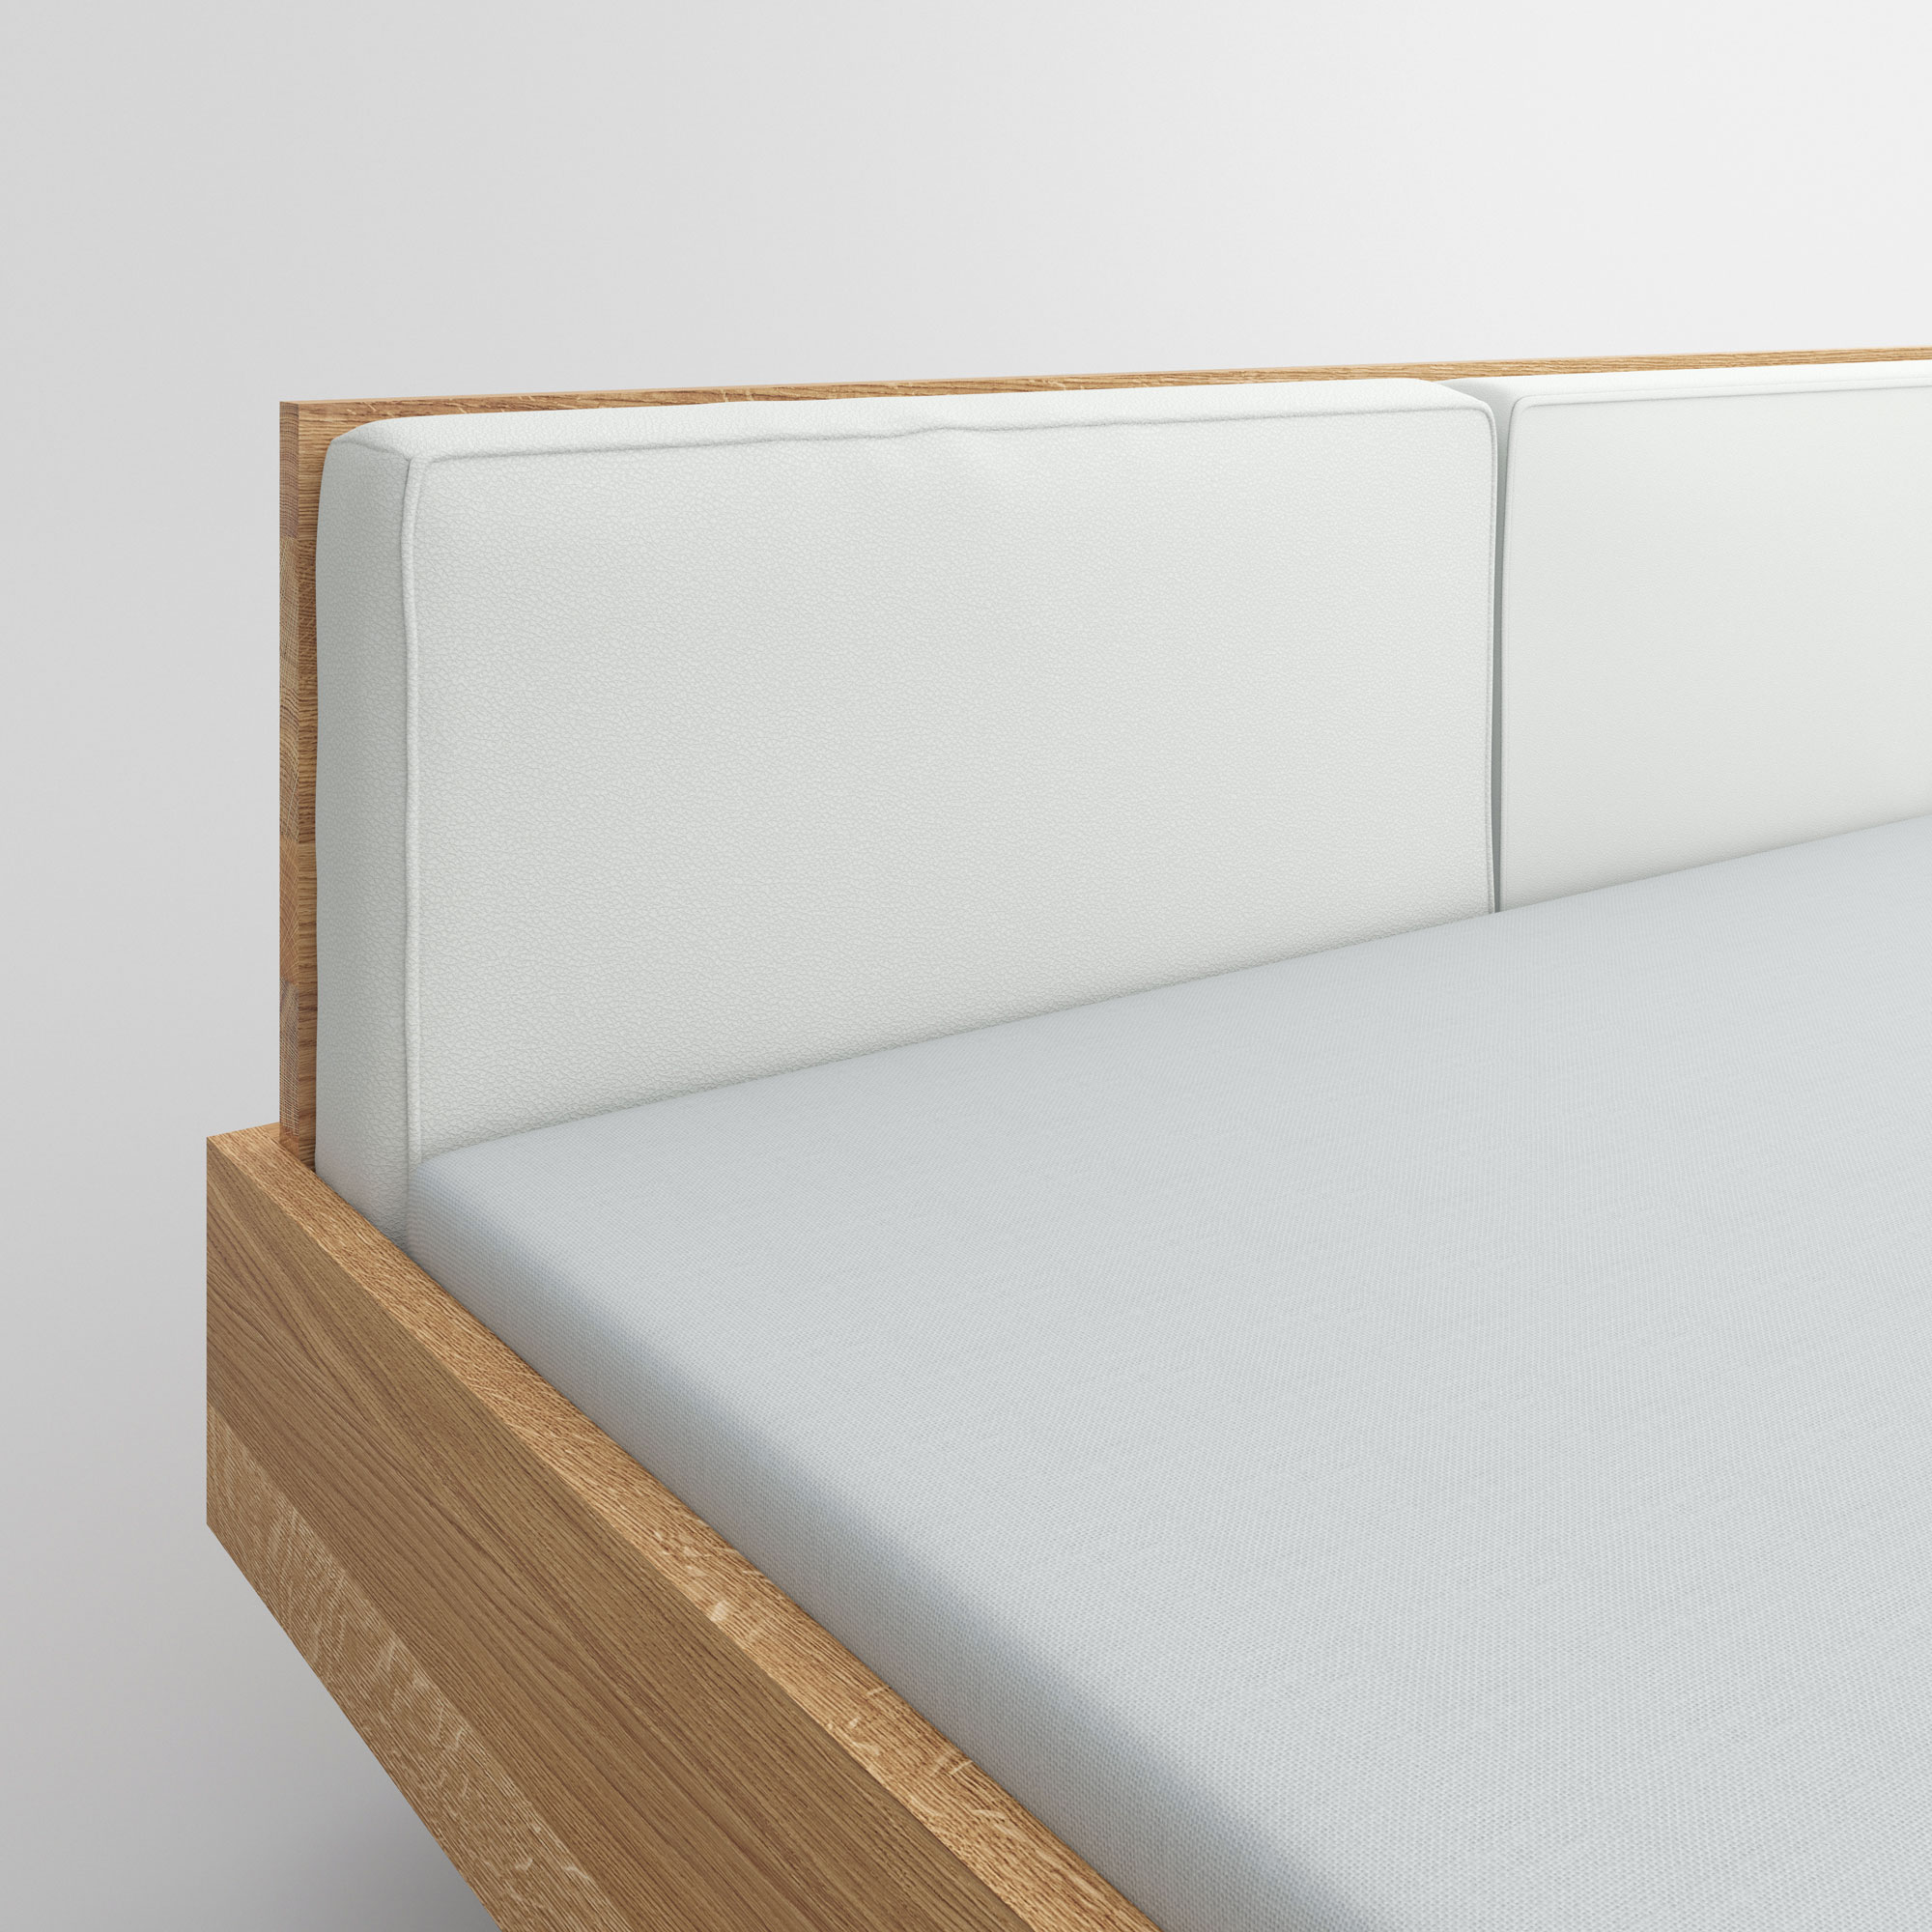 Wood Bed MEA cam4 custom made in solid wood by vitamin design